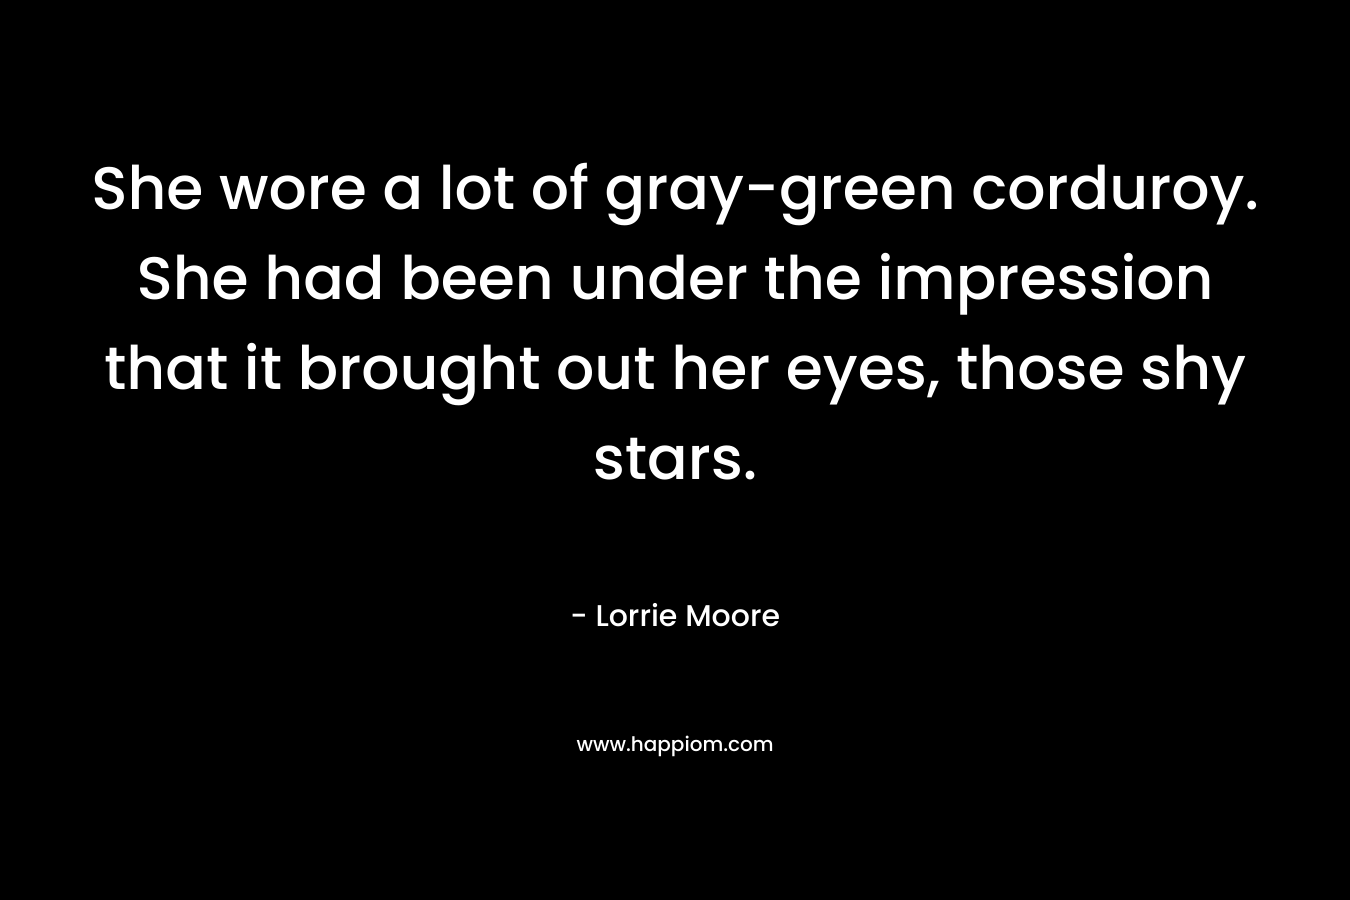 She wore a lot of gray-green corduroy. She had been under the impression that it brought out her eyes, those shy stars. – Lorrie Moore